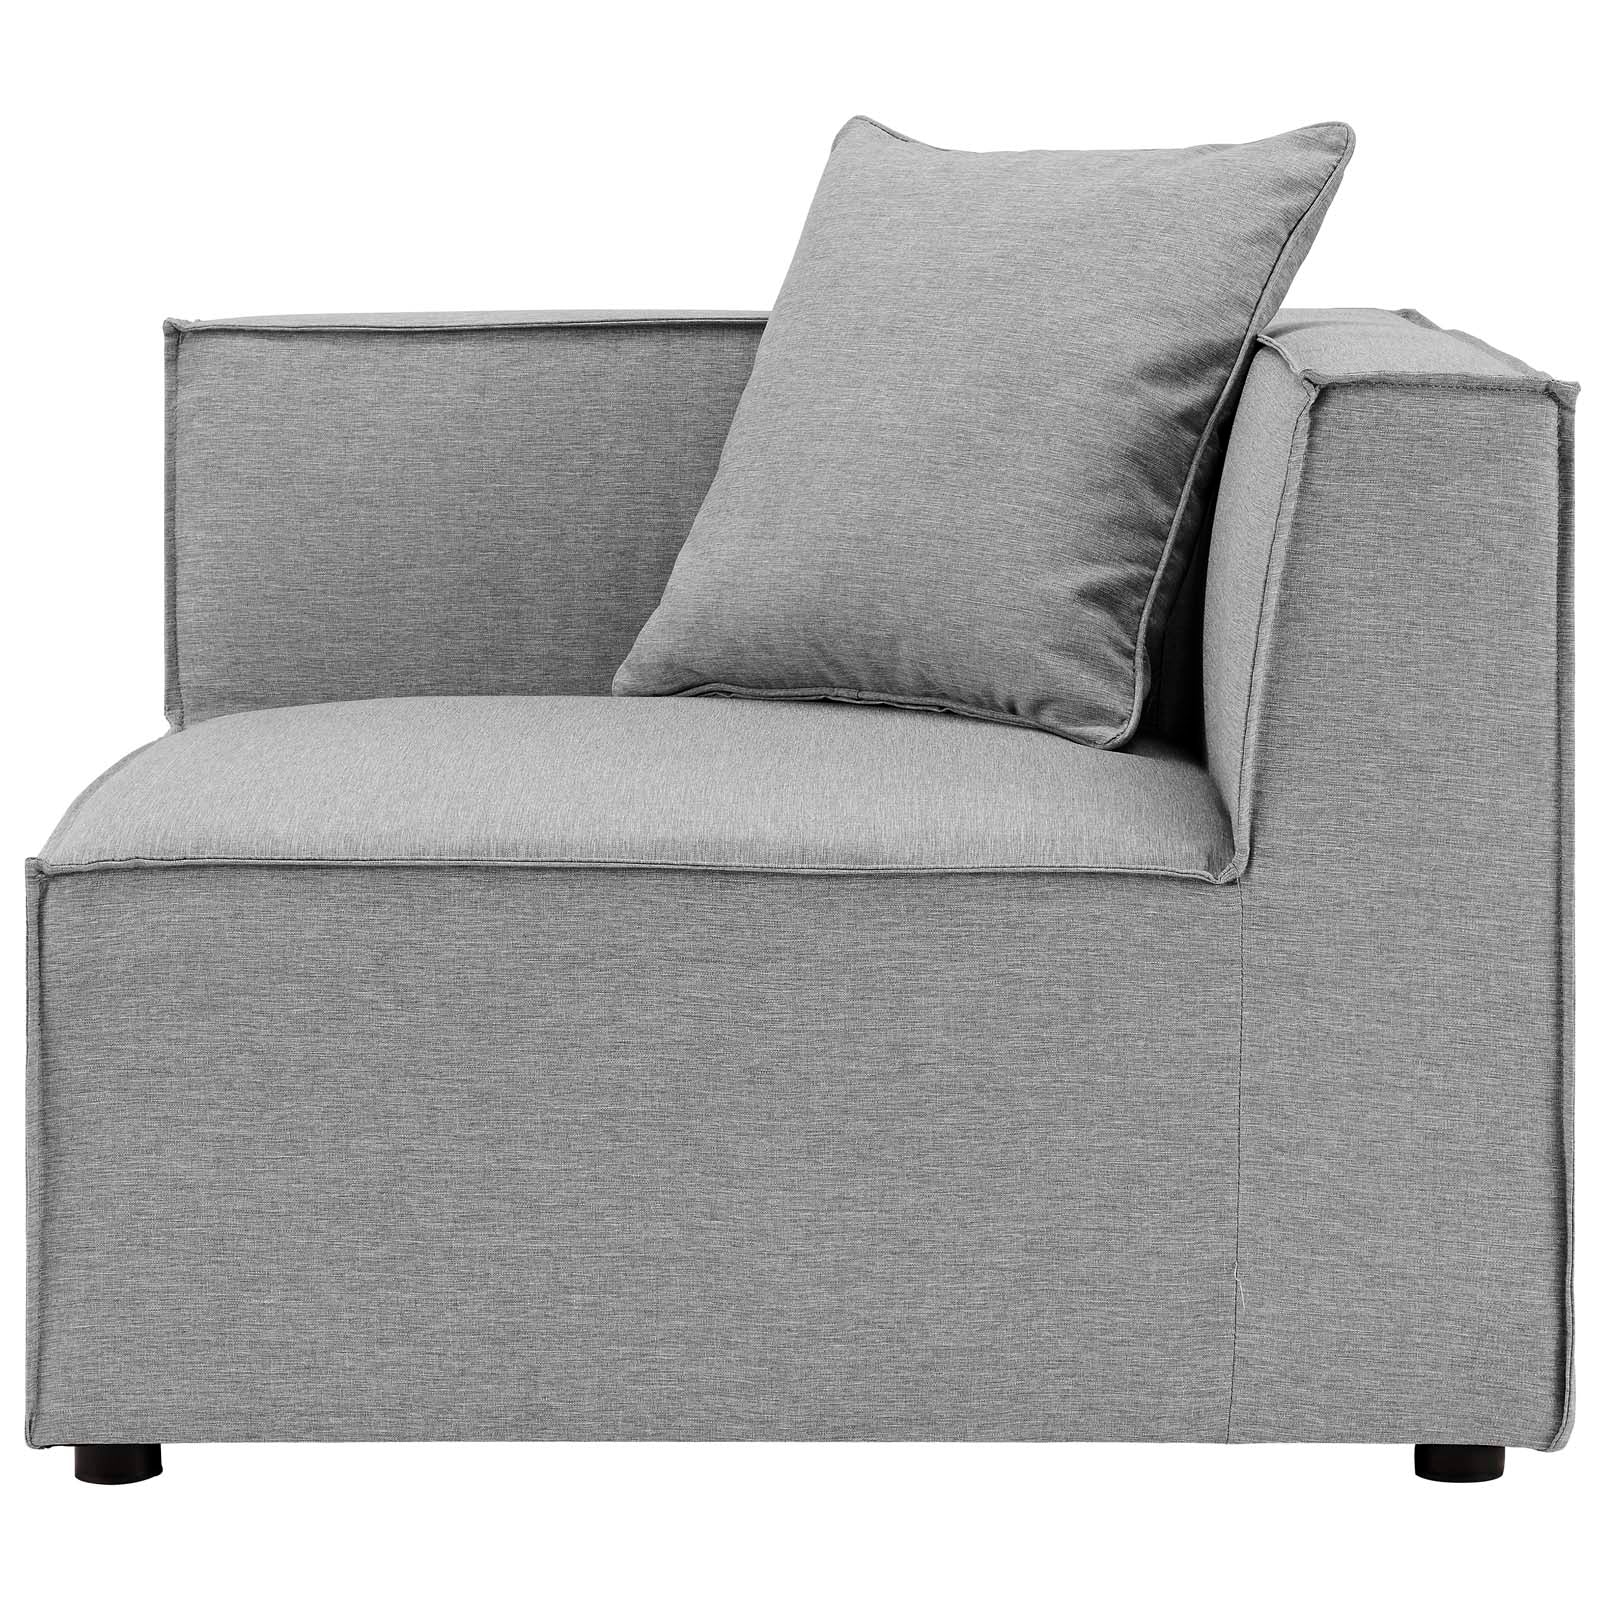 Modway Outdoor Sofas - Saybrook Outdoor Patio Upholstered 2-Piece Sectional Sofa Loveseat Gray